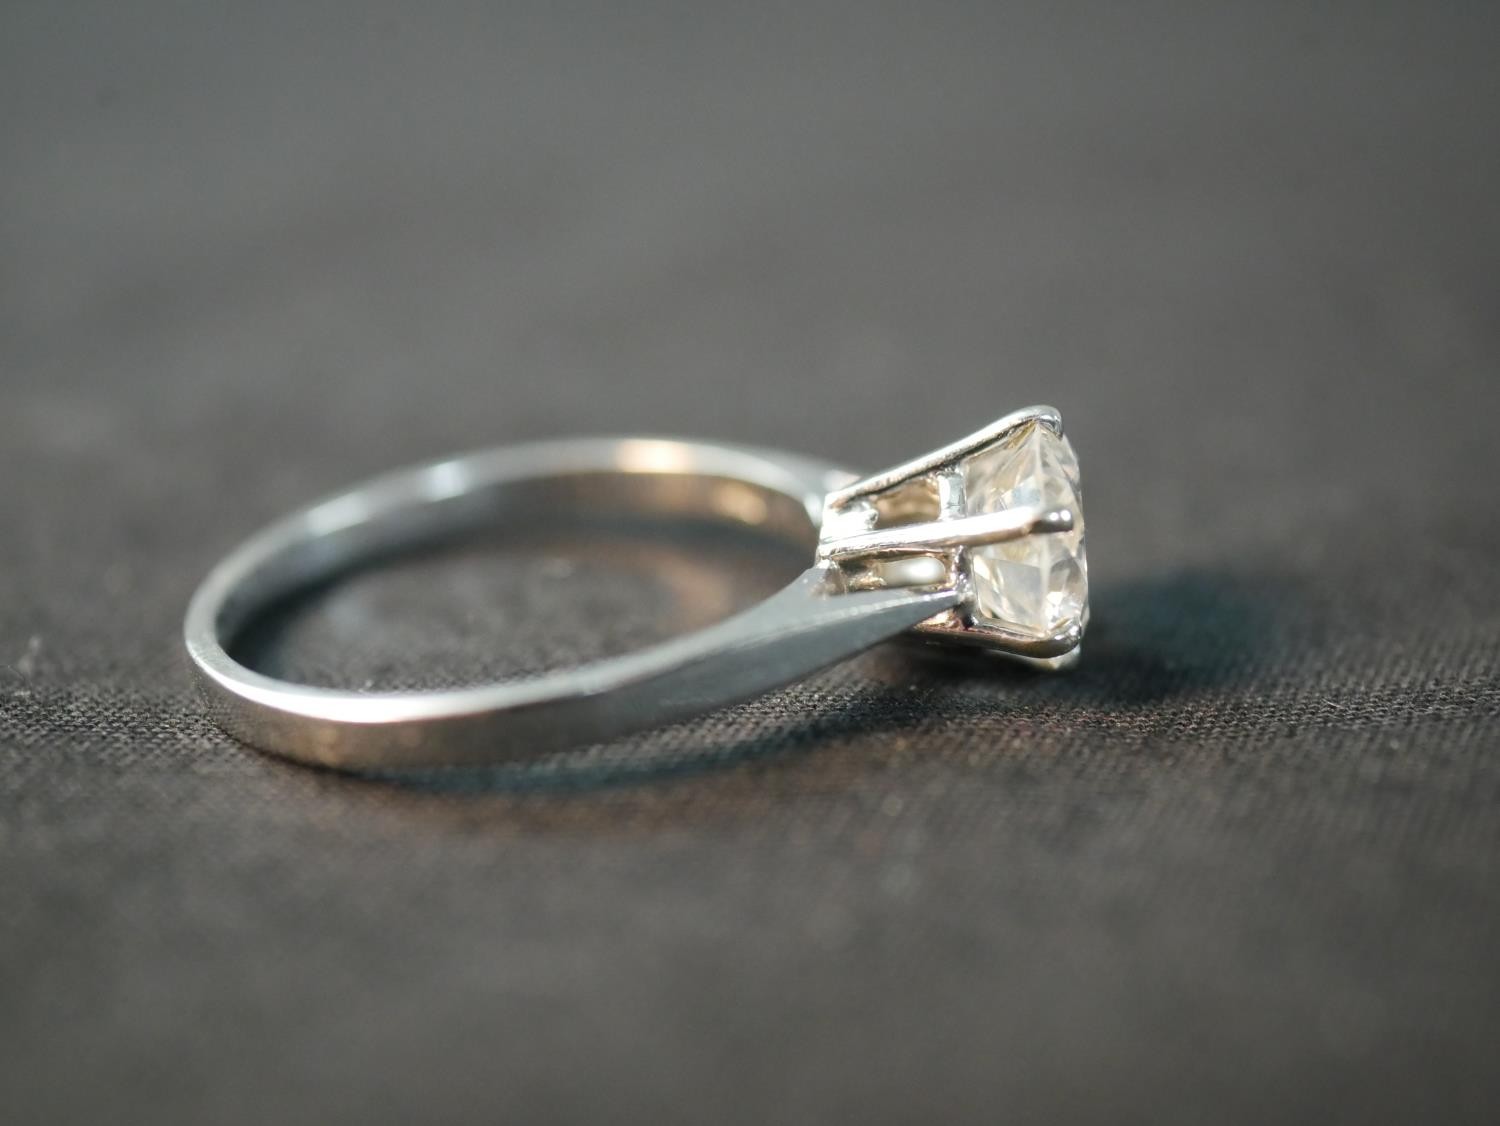 An 18 carat white gold solitaire diamond ring, set with a round old cut diamond in an open back - Image 4 of 7